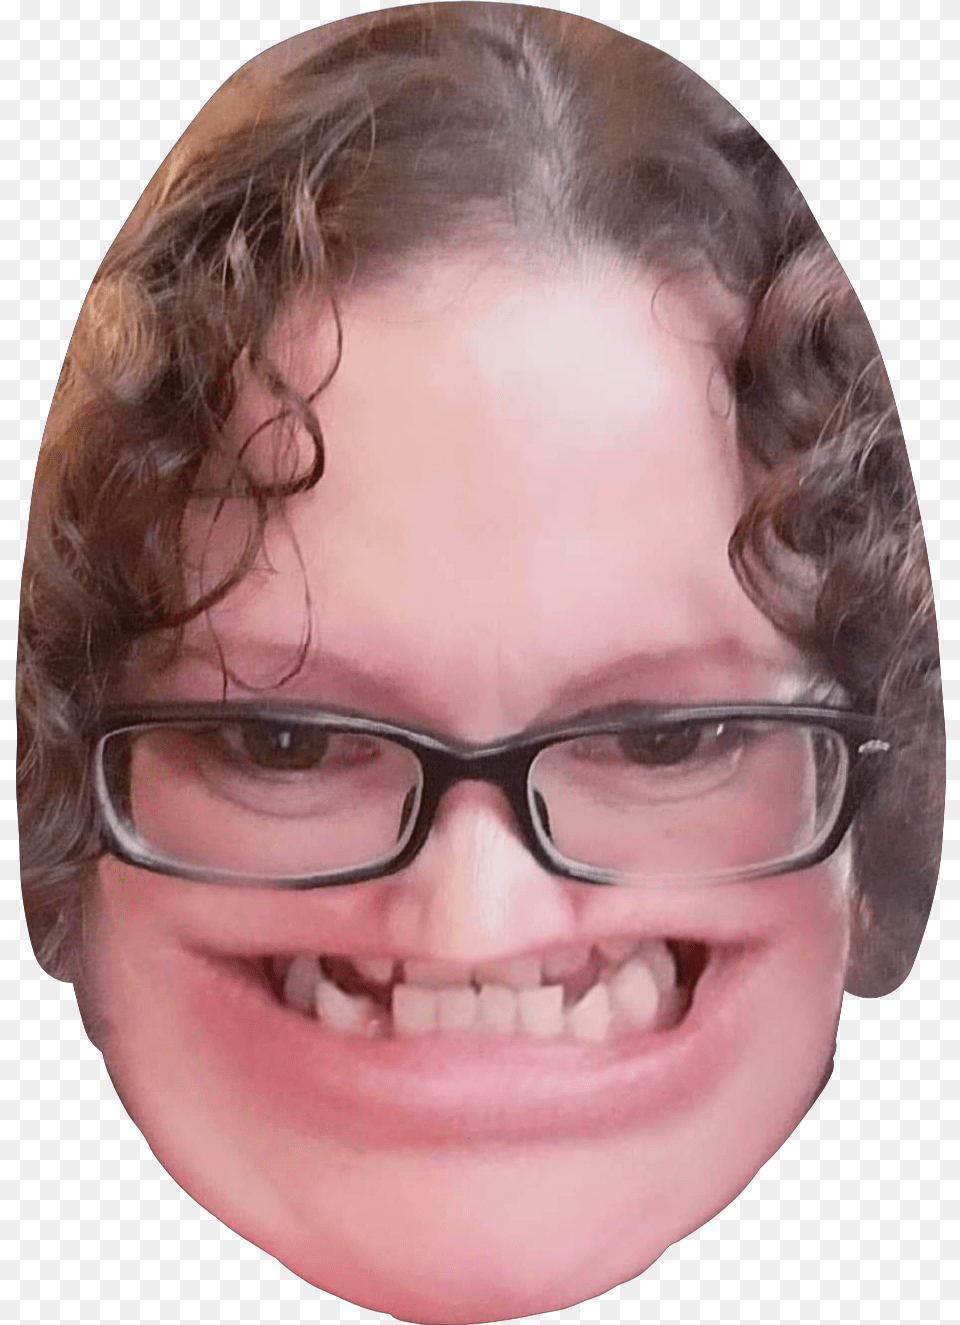 Funnyface Creepyface Creepy Face Creepyface, Accessories, Smile, Person, Head Free Transparent Png